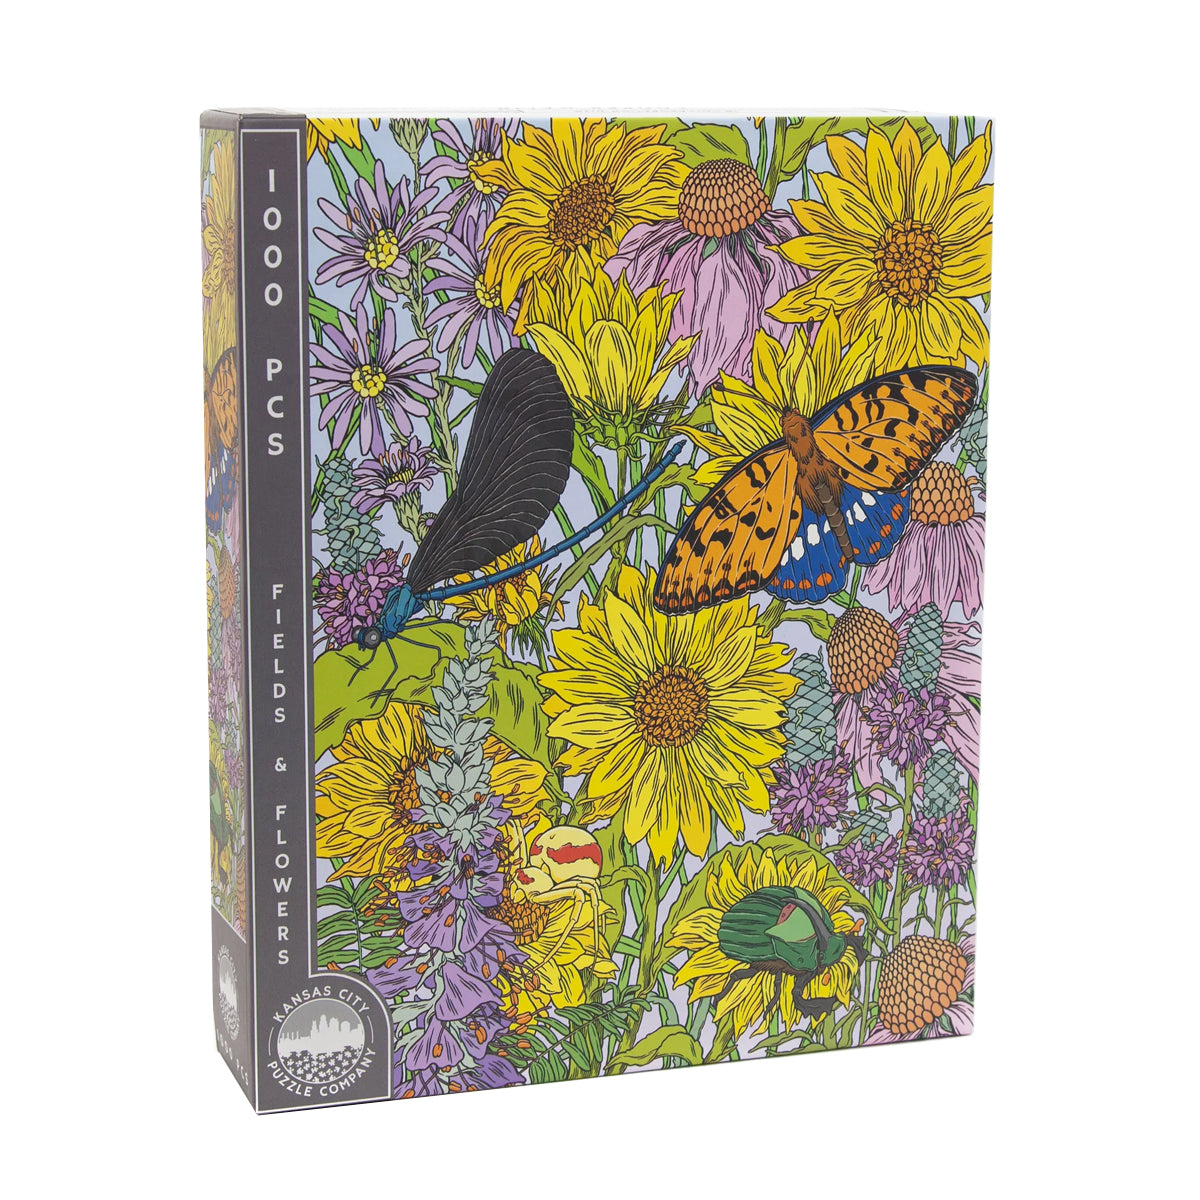 KCPC Fields & Flowers Puzzle by Cooper Malin